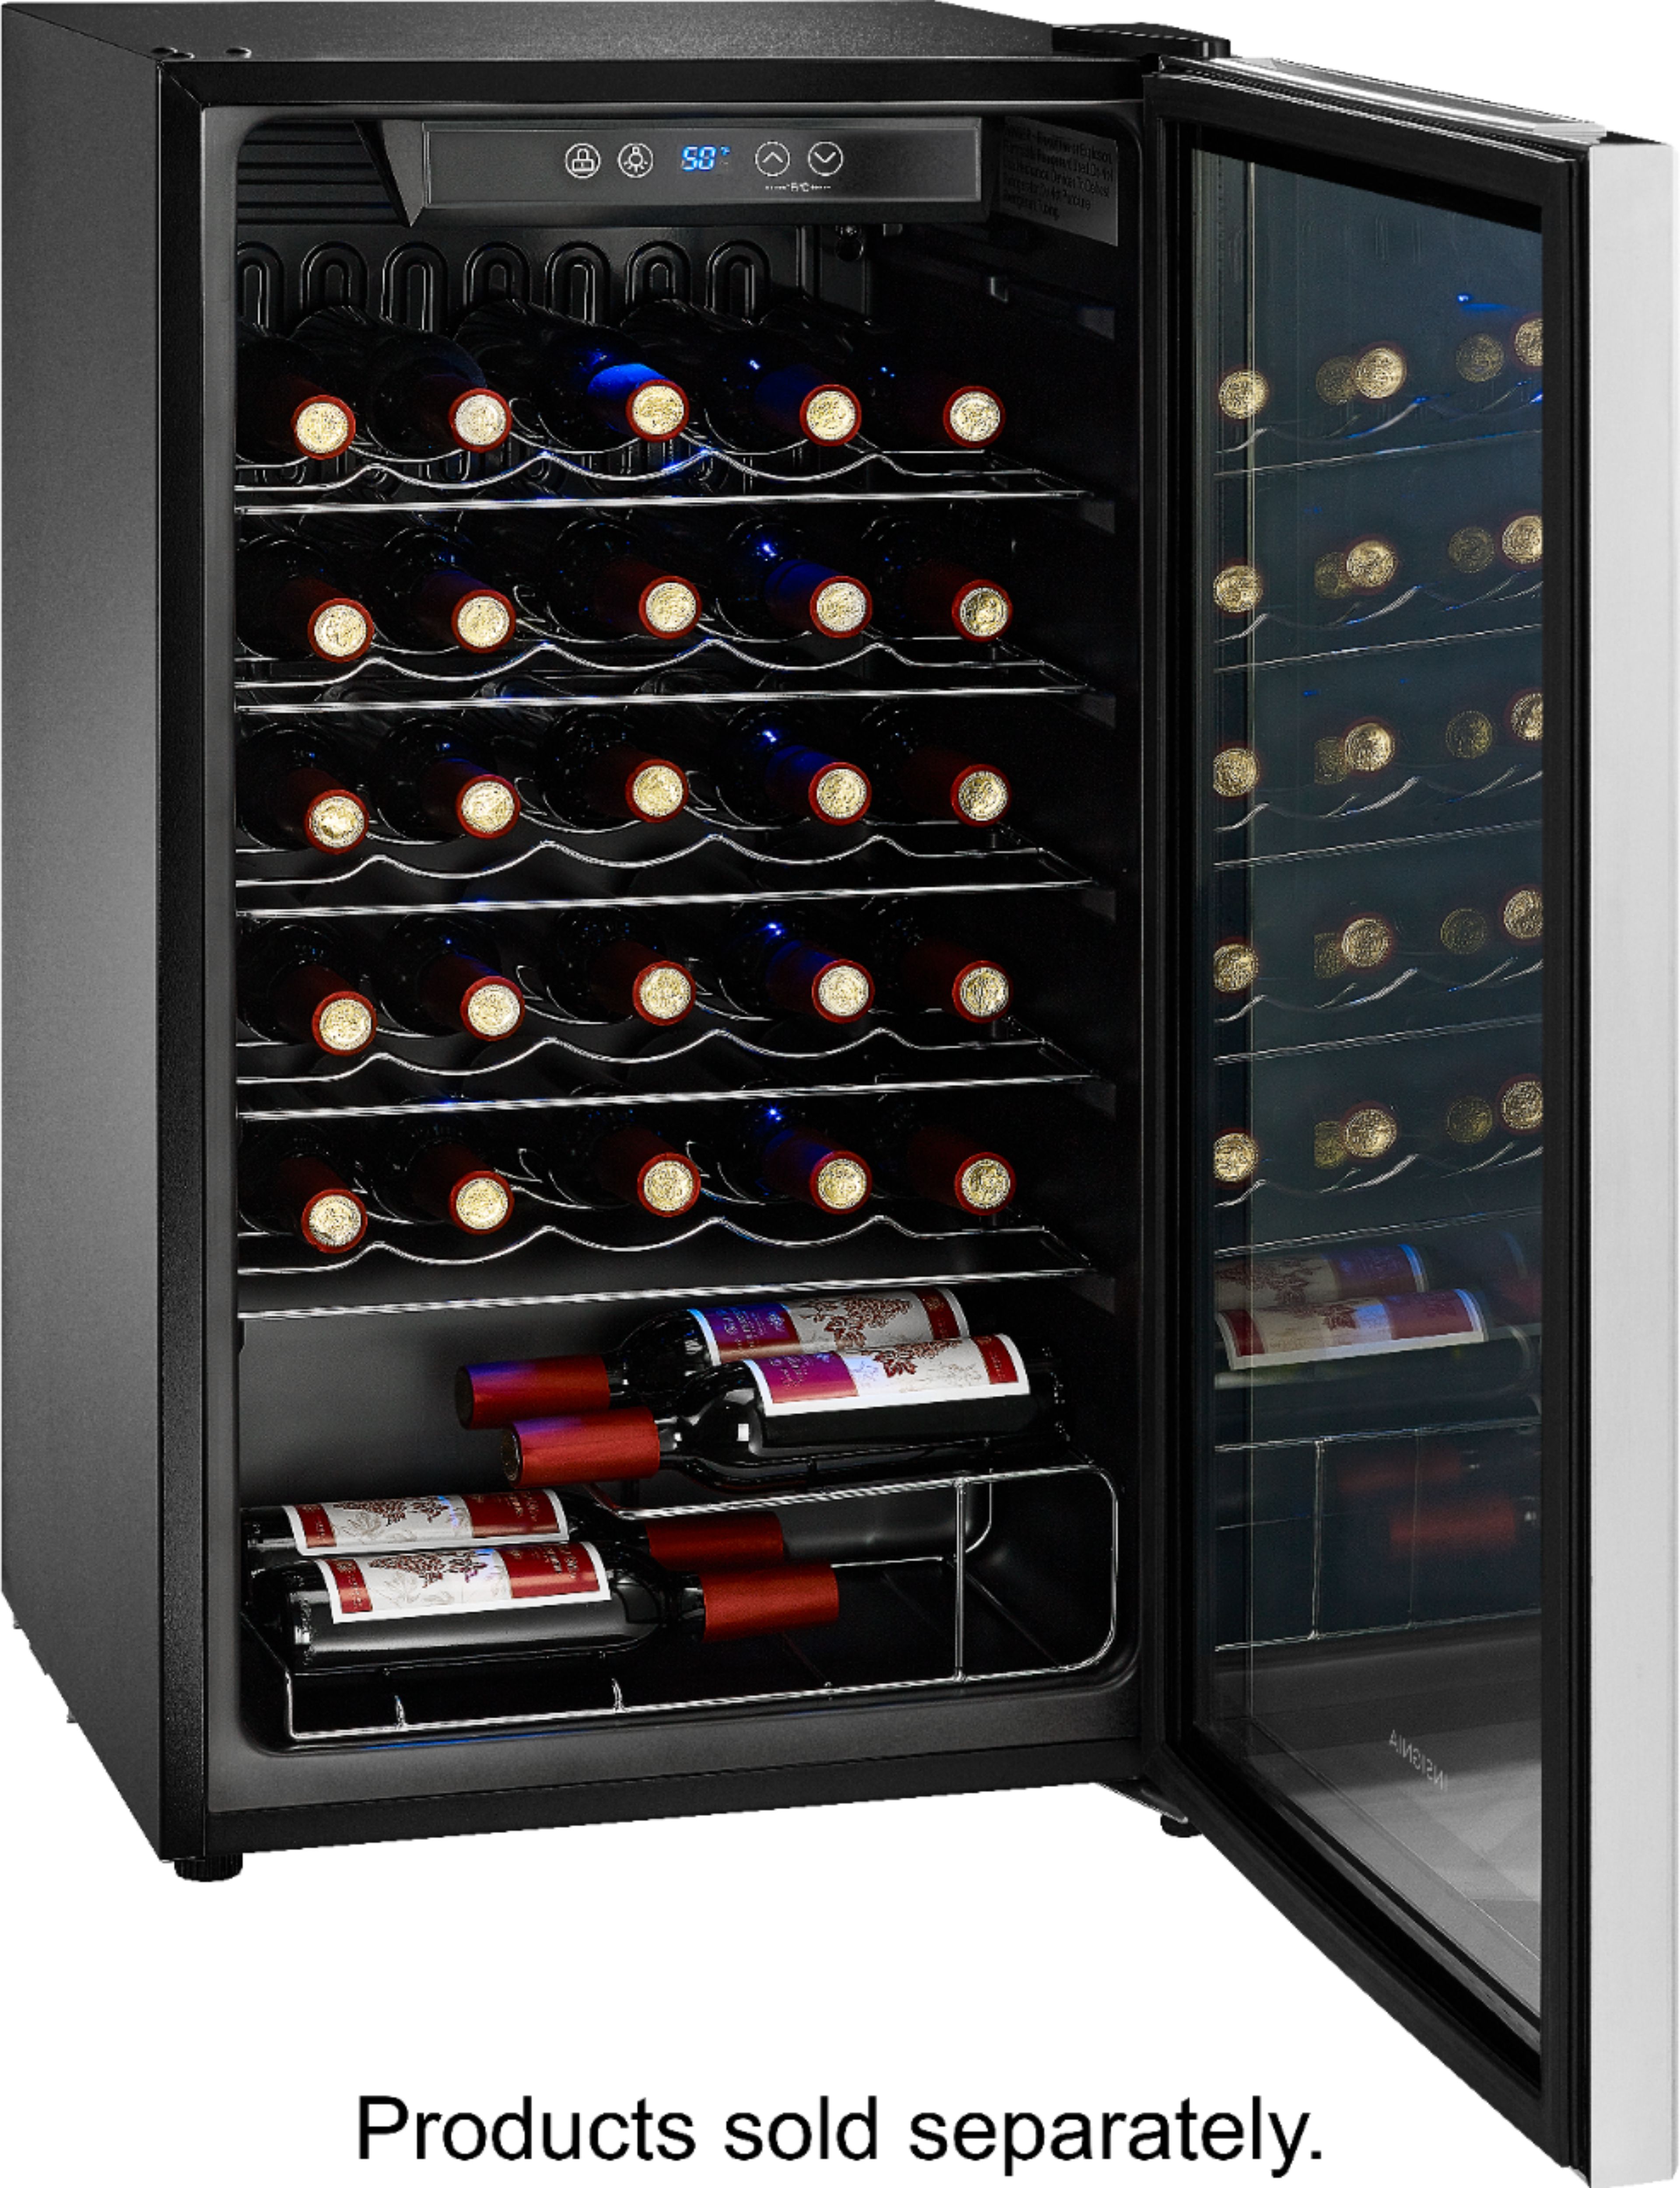 Insignia 29 Bottle Wine Cooler Stainless Steel Ns Wc29ss9 Best Buy